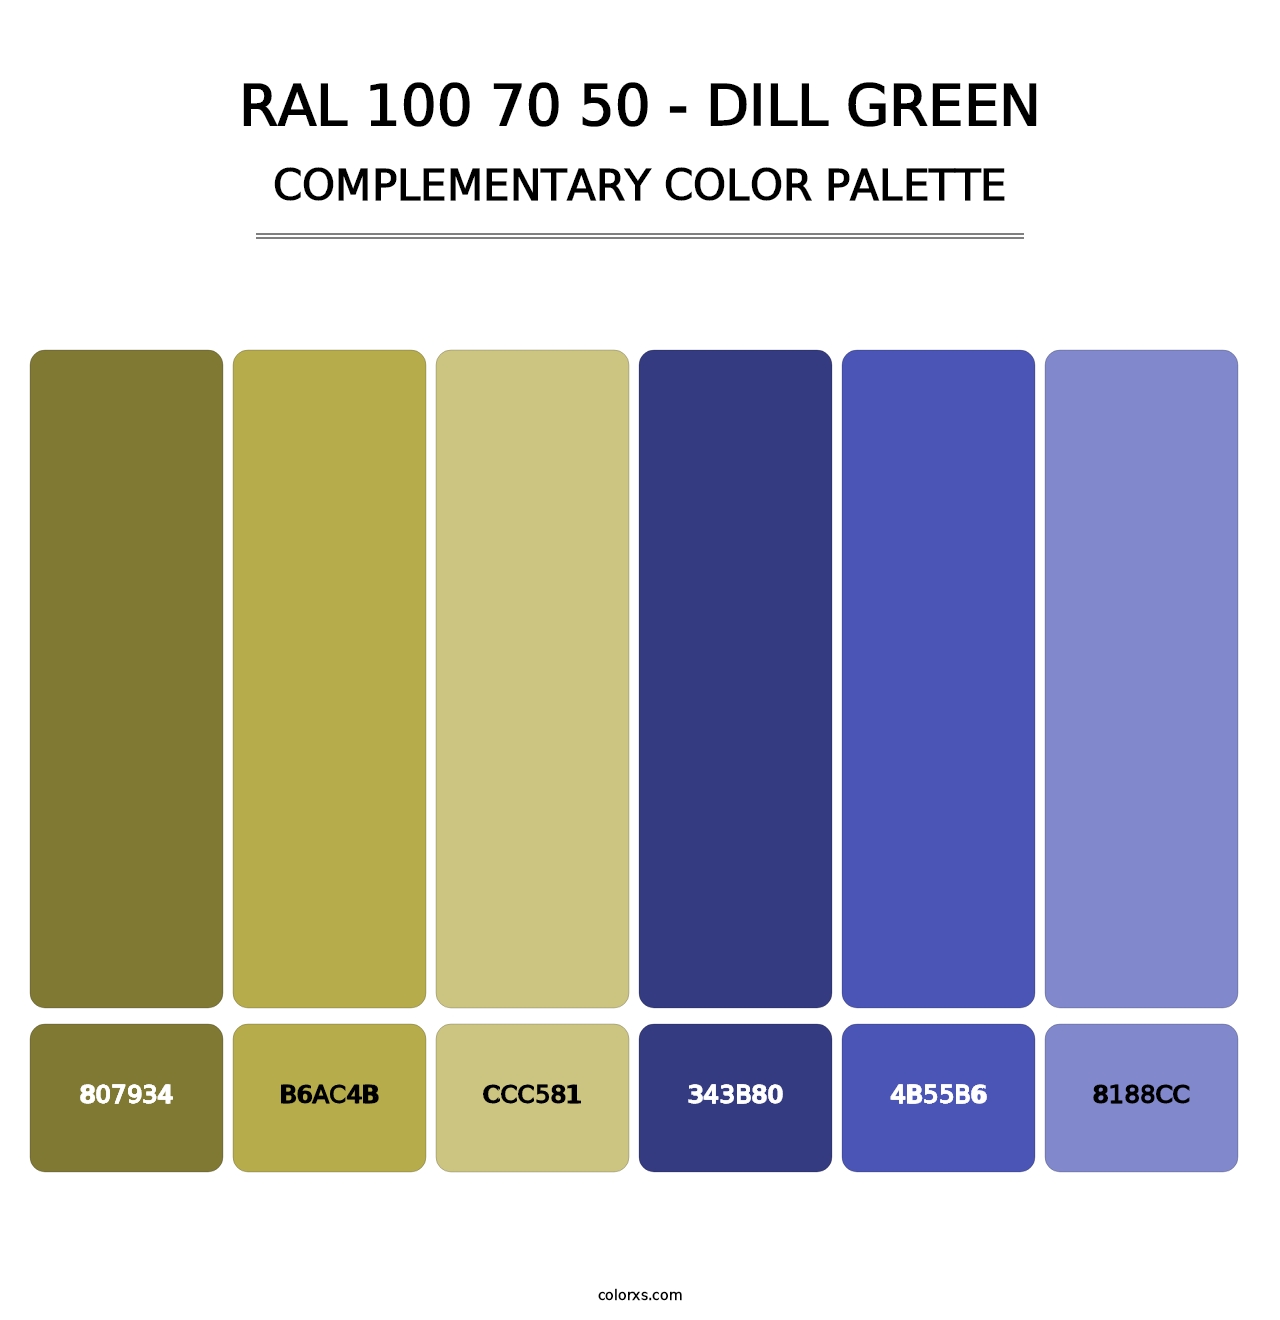 RAL 100 70 50 - Dill Green - Complementary Color Palette